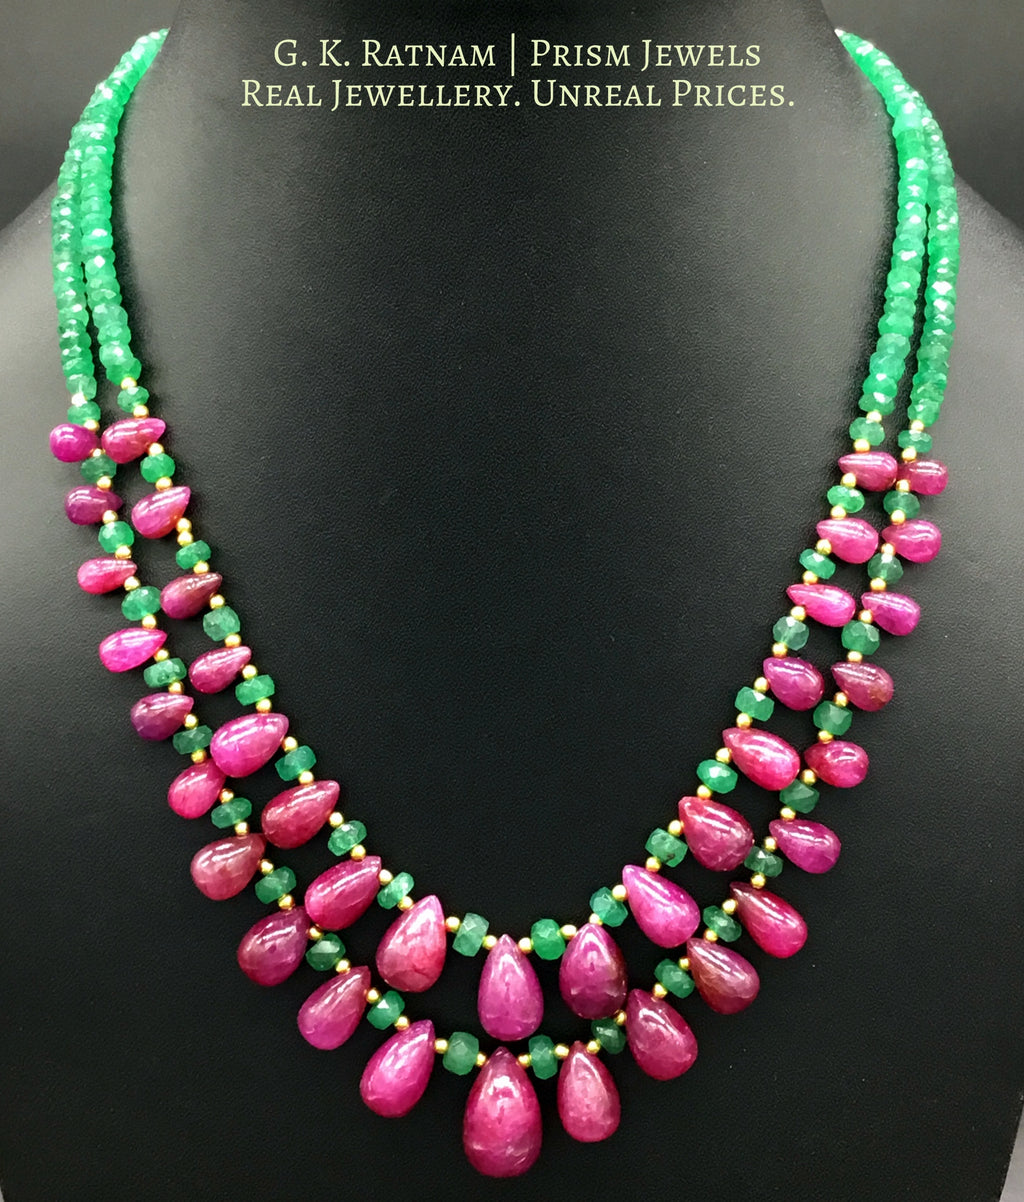 Two-row Necklace with ruby drops and emerald-grade green beryls - G. K. Ratnam